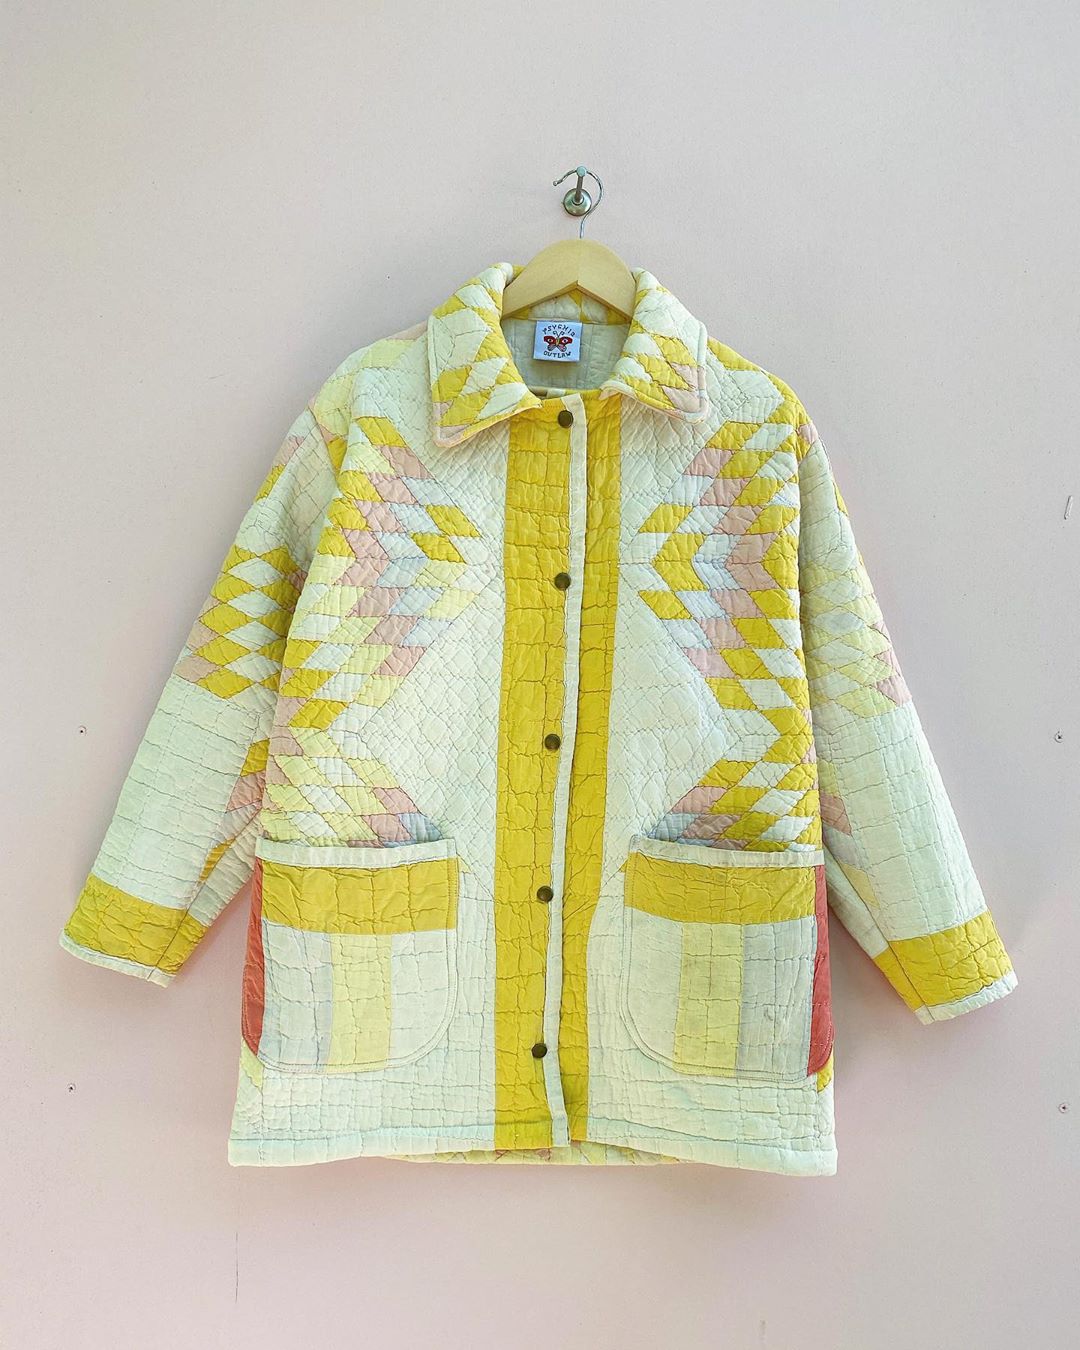 Quilted coat by Psychic Outlaw